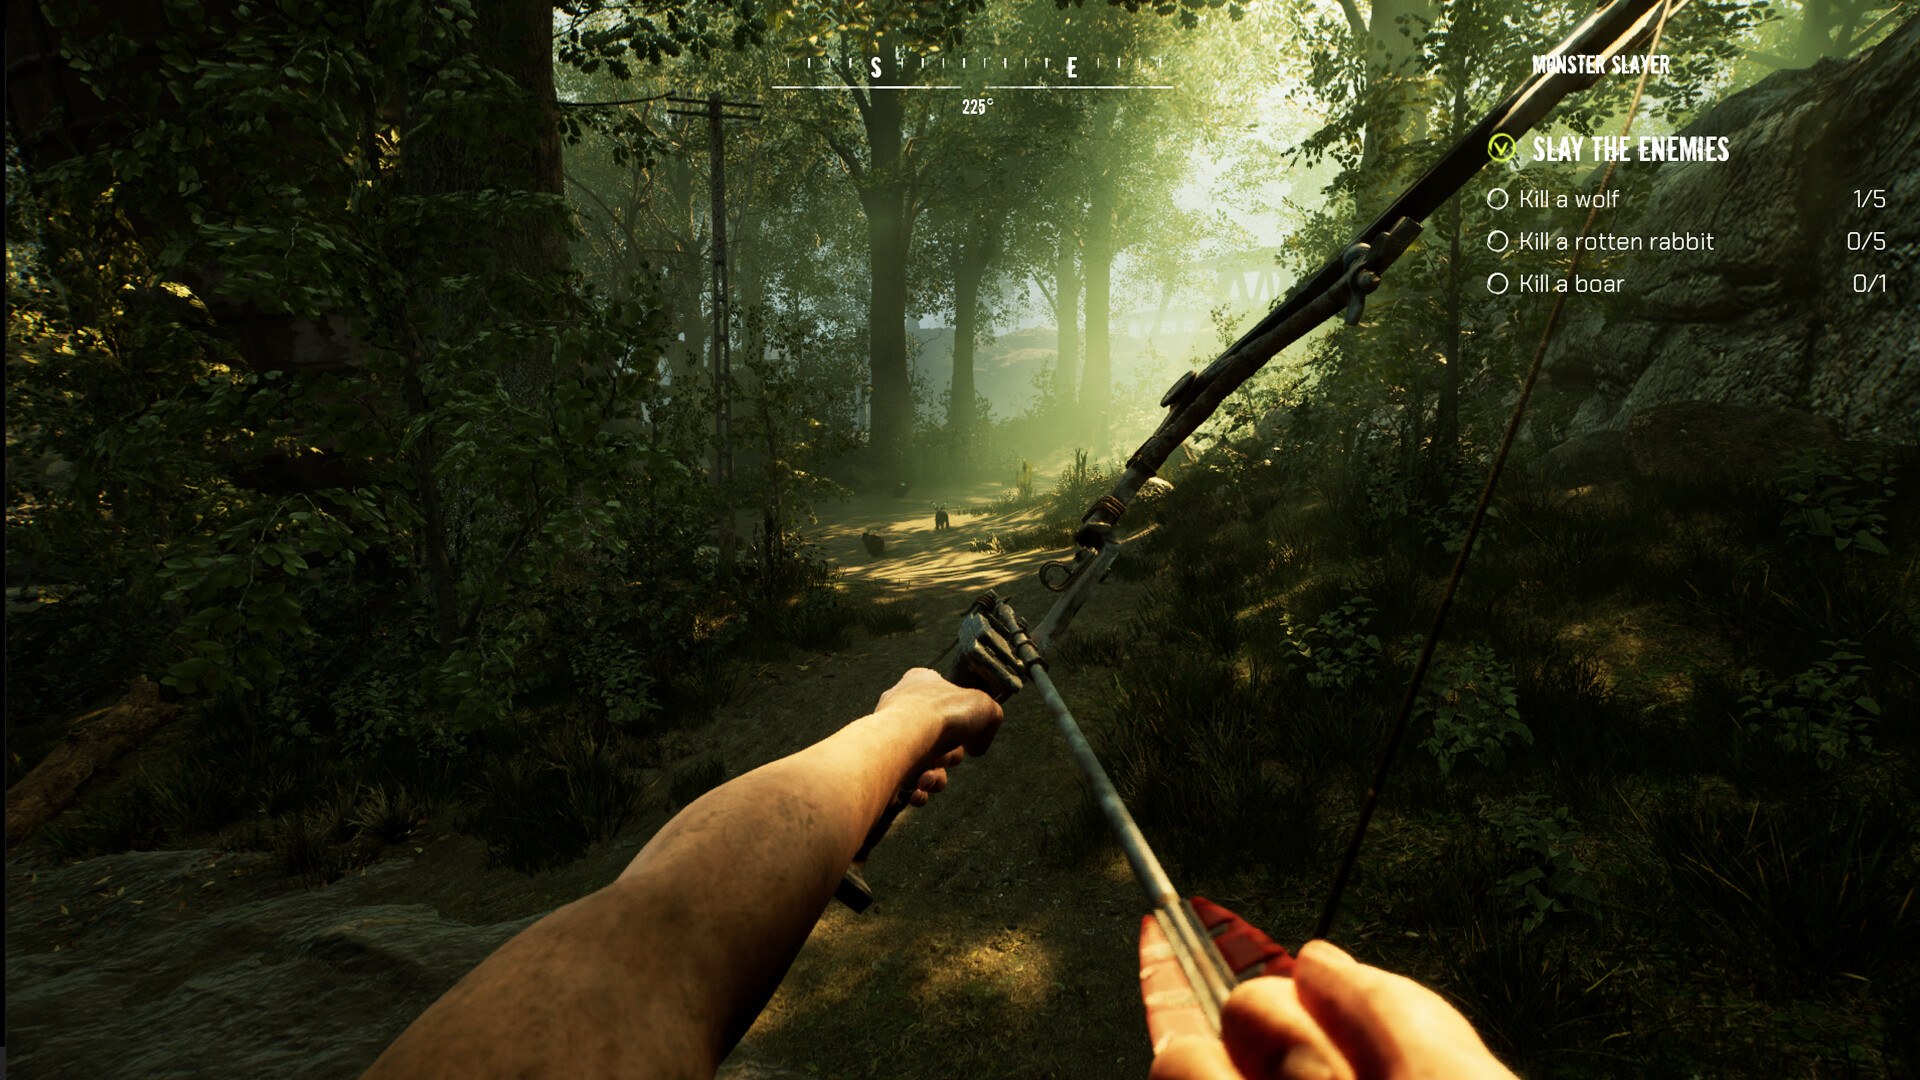 A Serum character wielding a bow and arrow.